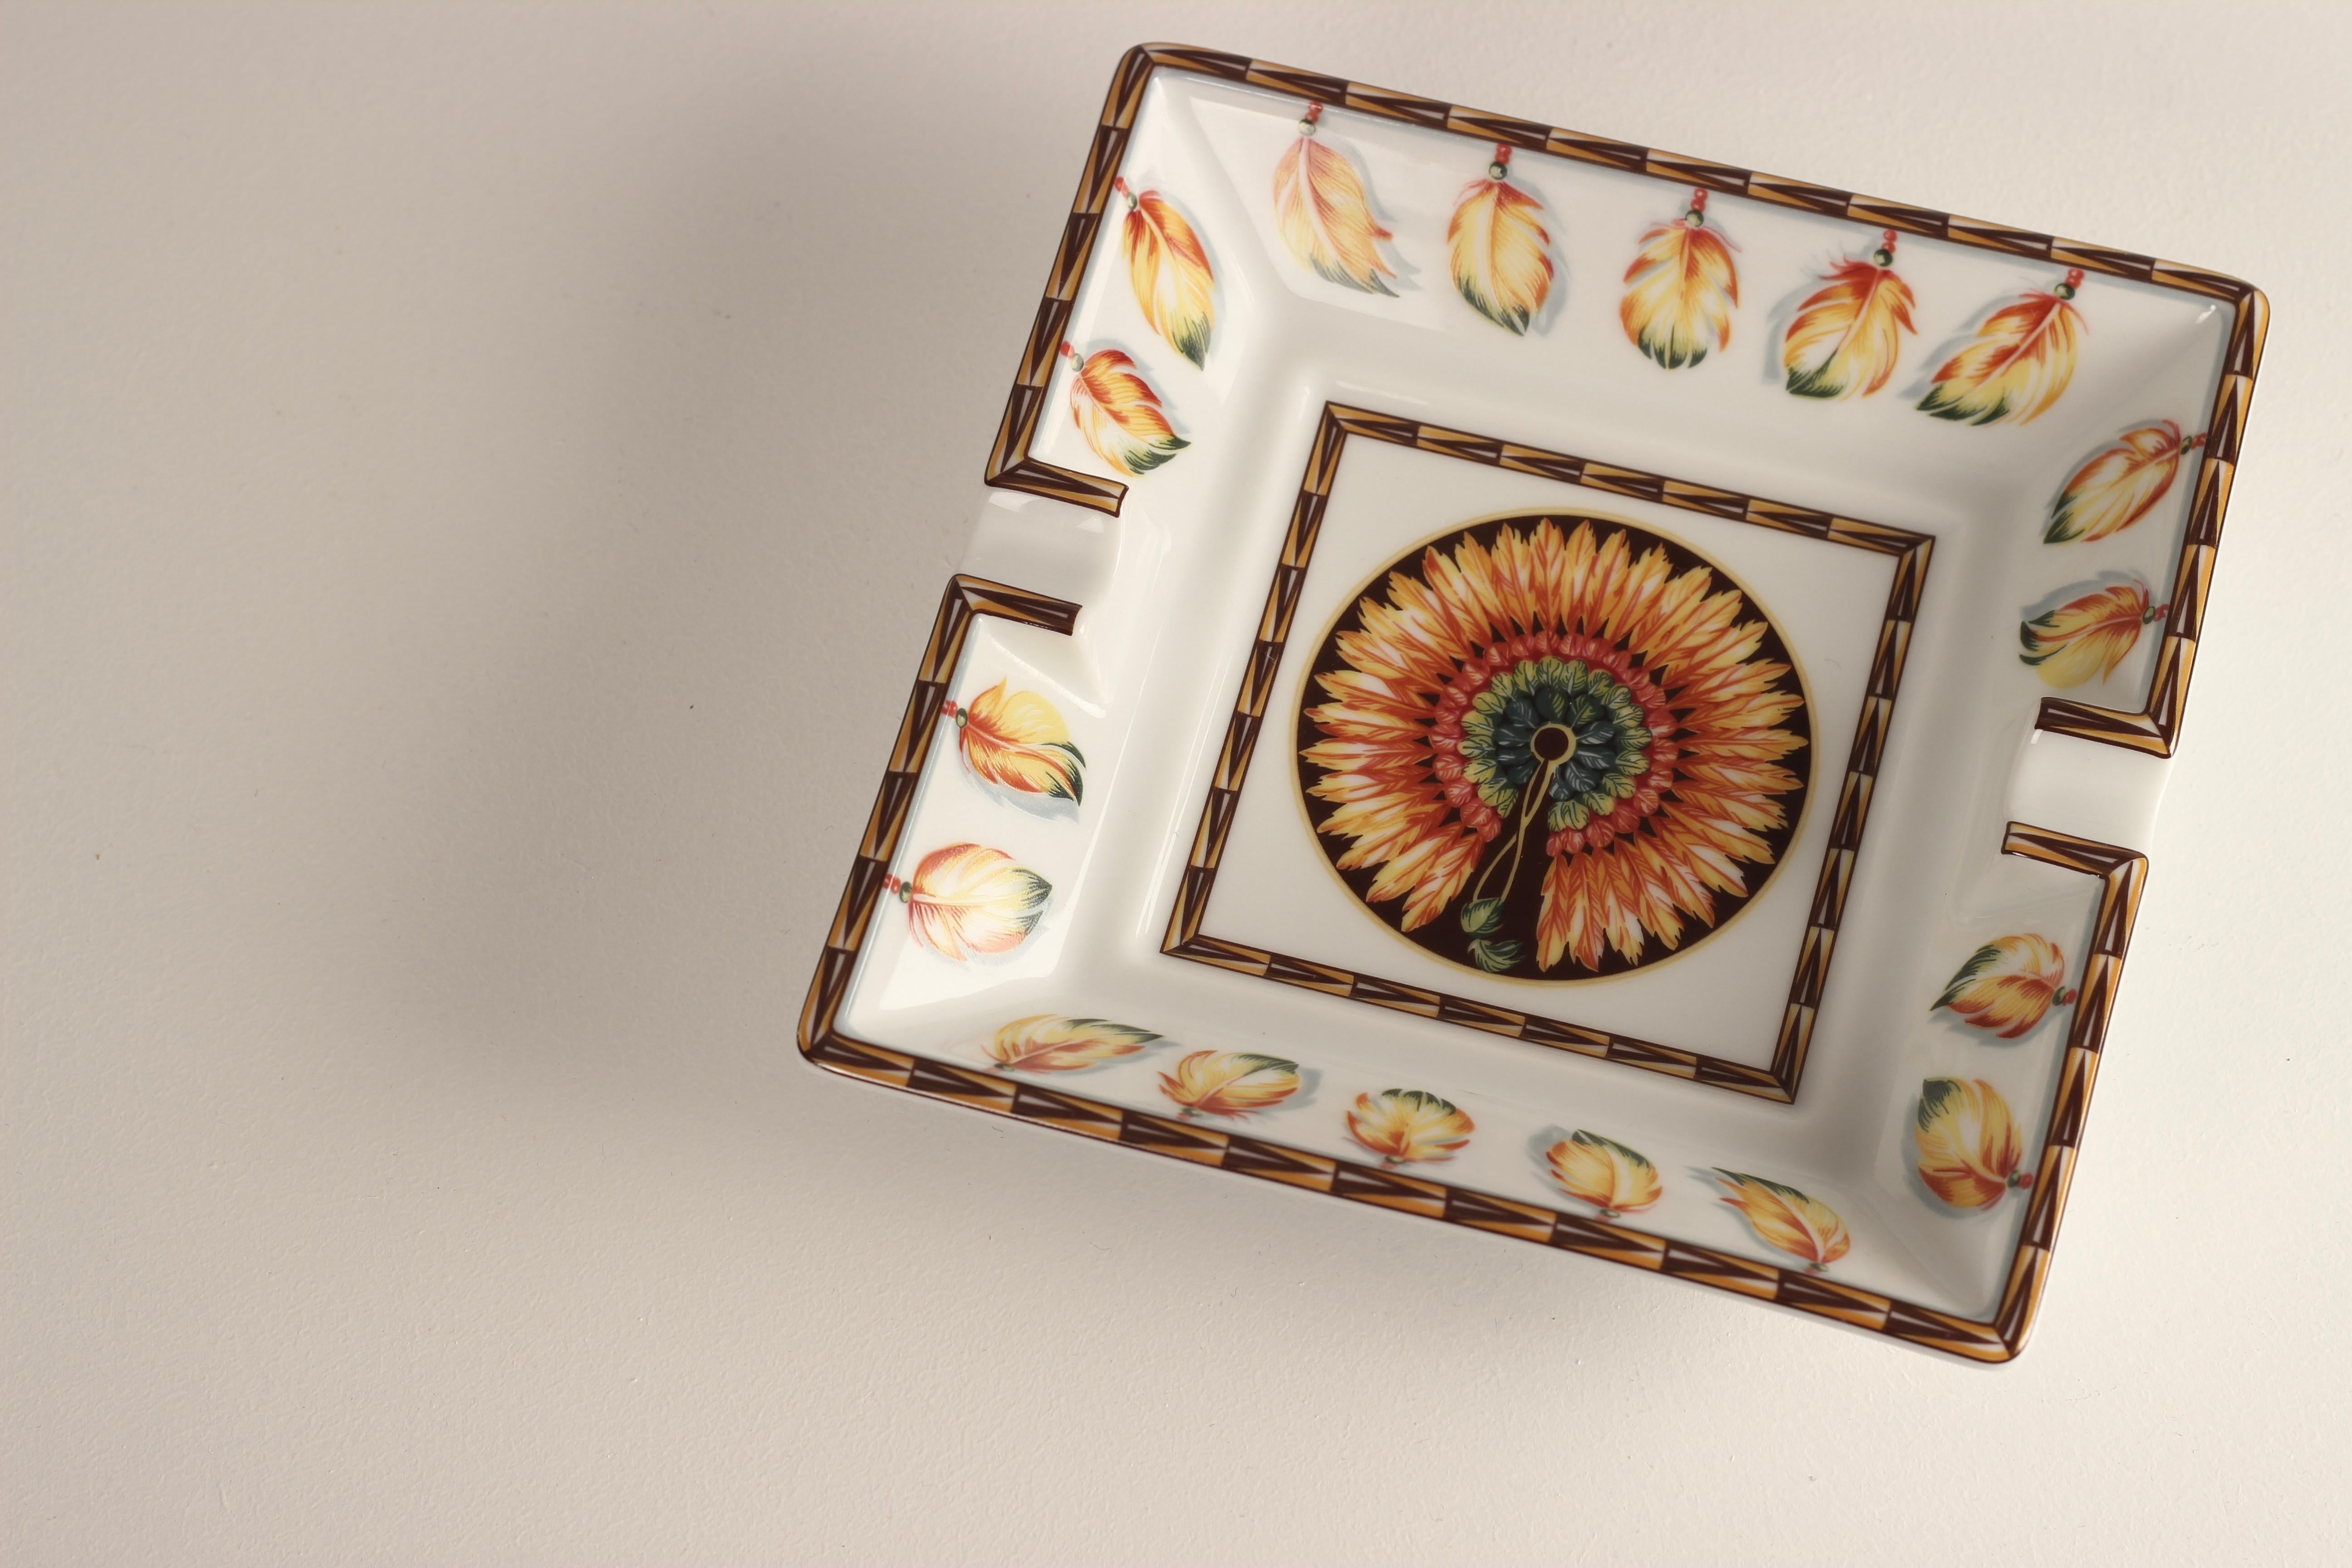 A fine example of Hermès design and its enduring craftsmanship. Produced in the 1990’s, this Square Porcelain Ashtray would also serve well as a key or loose change Tray Vide-Poche Catchall. Exquisitely coloured with a study of a finely detailed